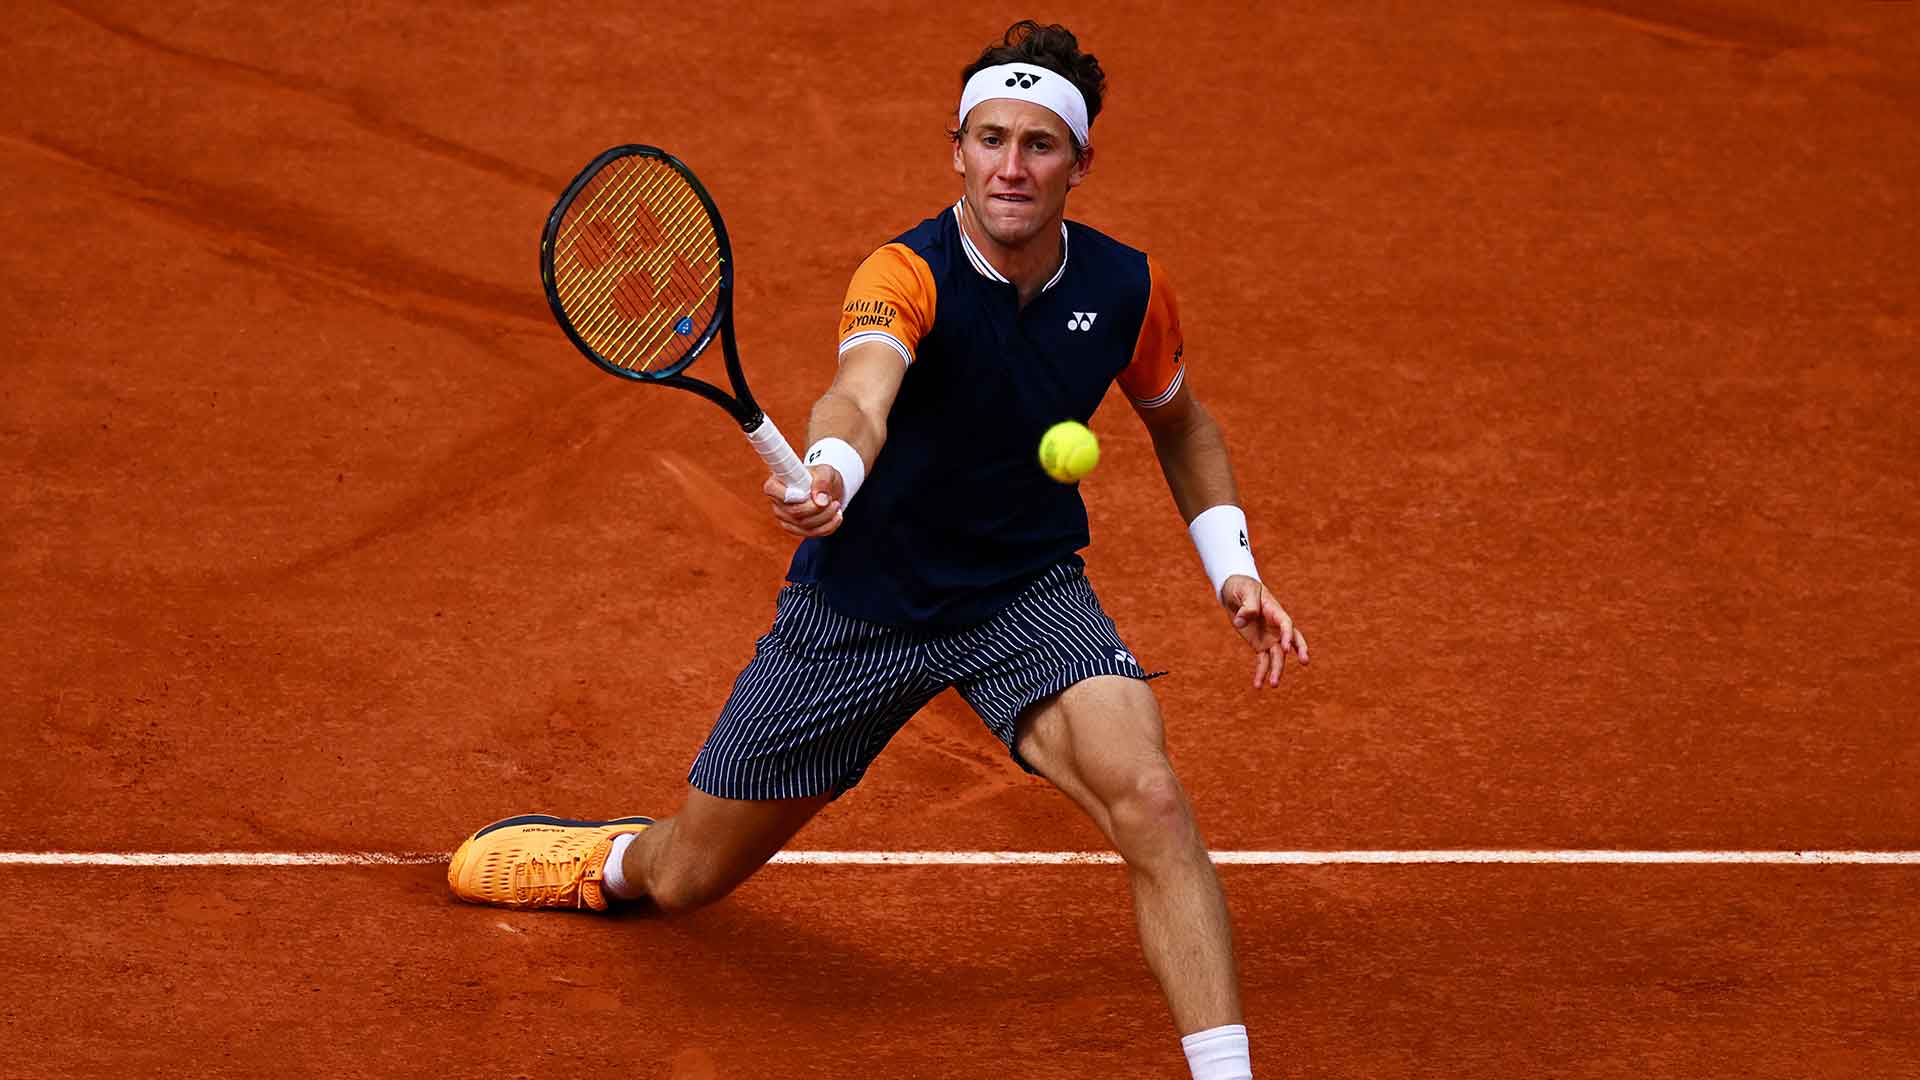 Casper Ruud in action during the Roland Garros final.